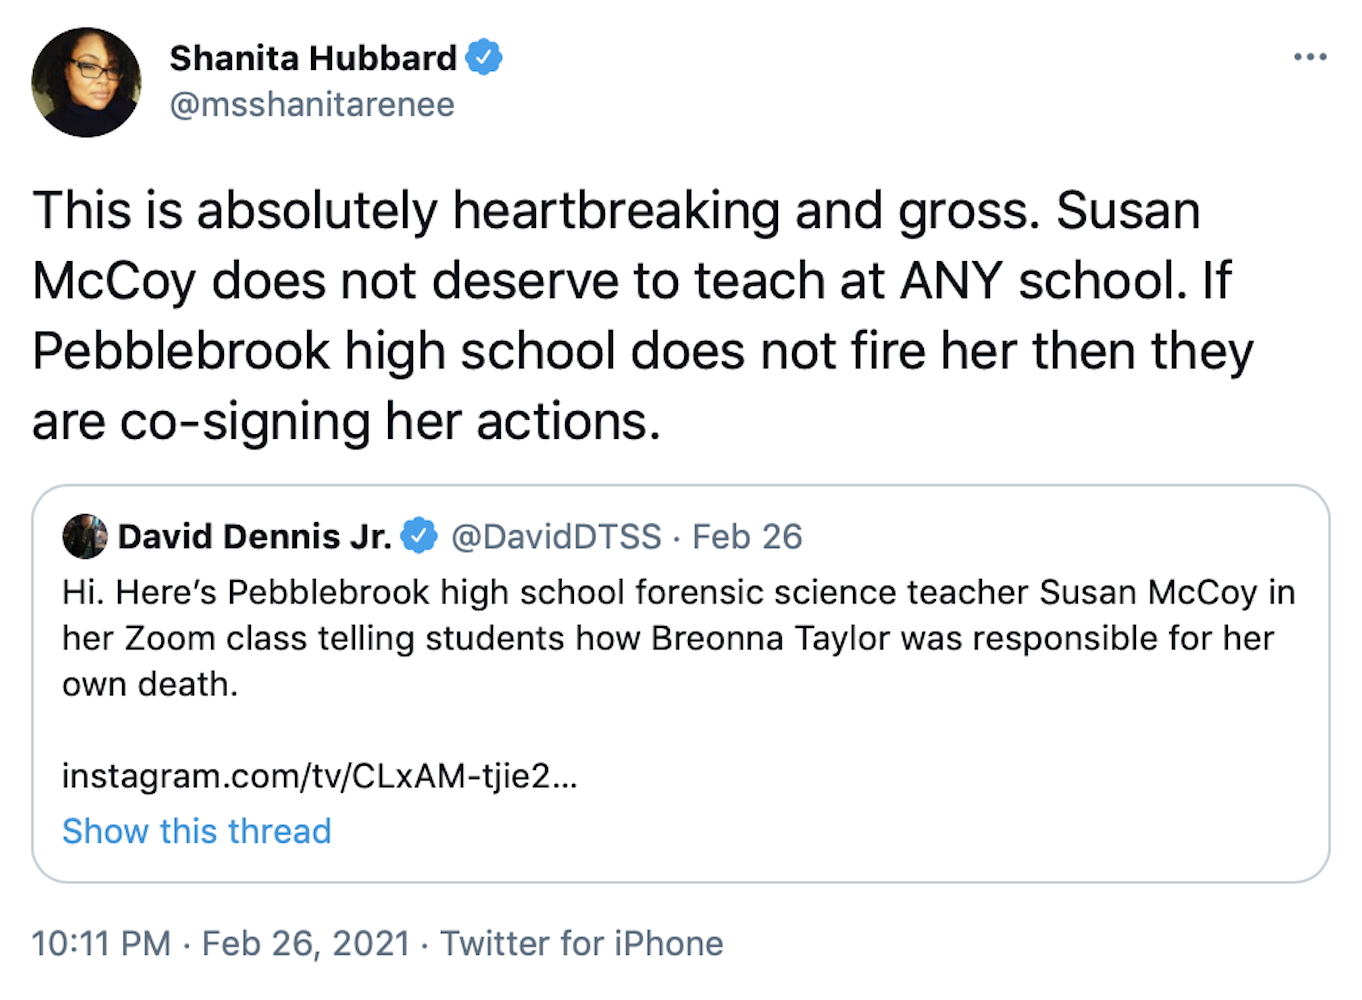 This is absolutely heartbreaking and gross. Susan McCoy does not deserve to teach at ANY school. If Pebblebrook high school does not fire her then they are co-signing her actions.